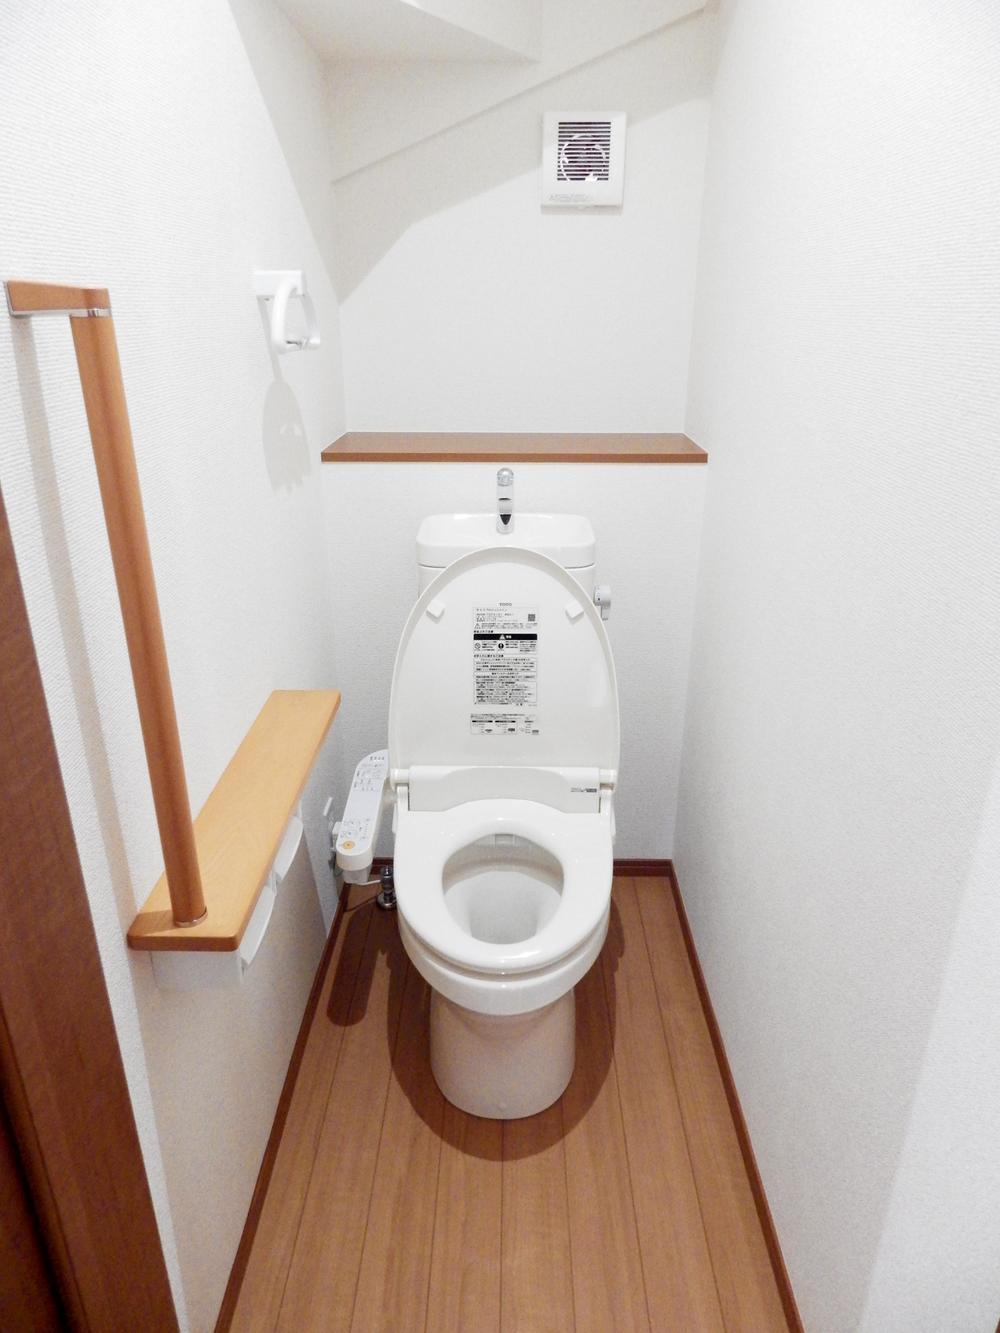 Toilet. It is water-saving toilets. Cleaning is also a breeze!